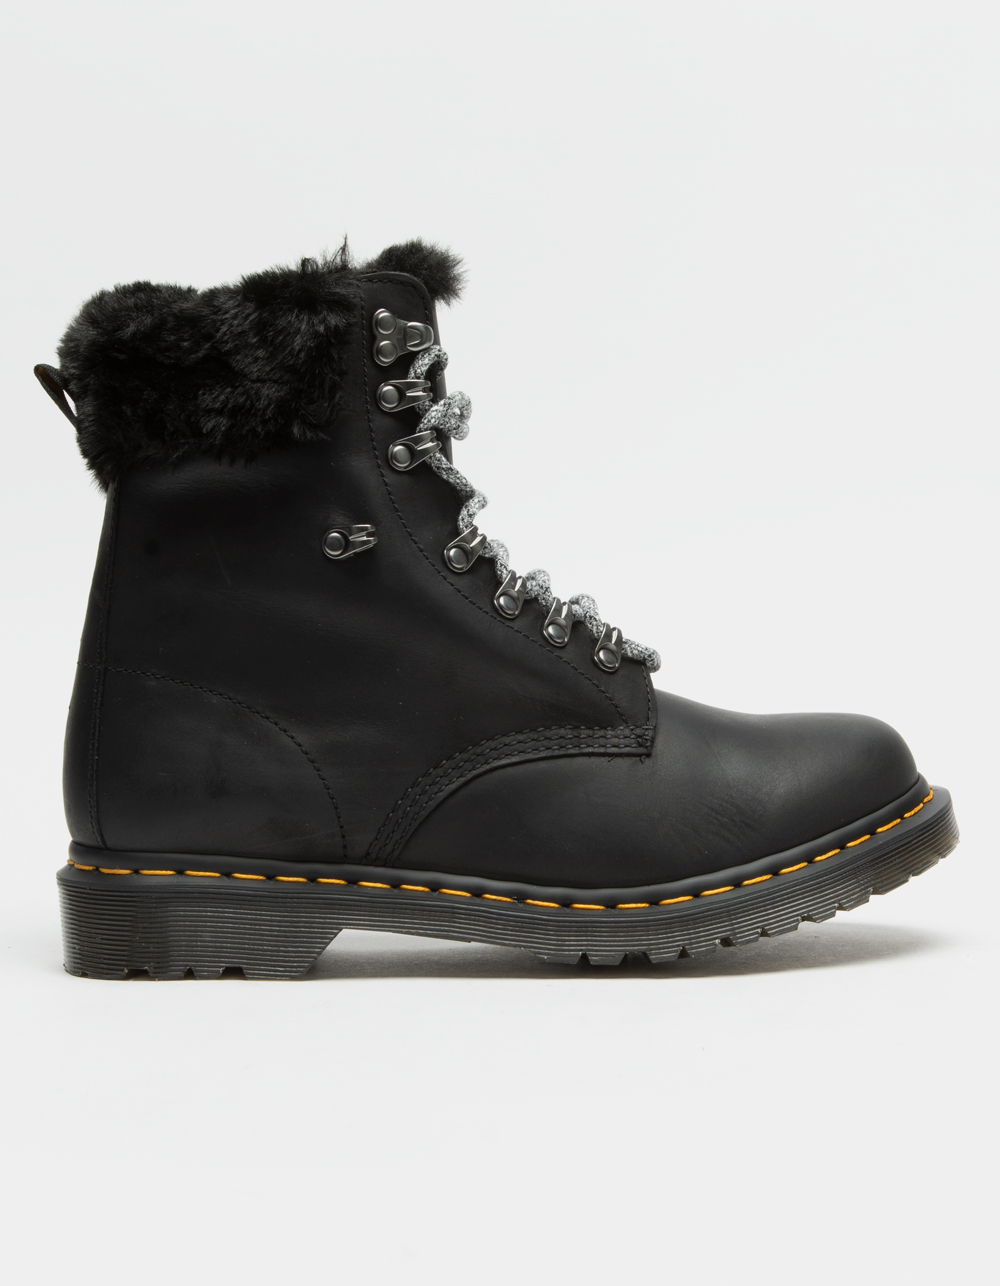 DR. MARTENS 1460 Serena Collar Faux Fur Lined Lace Up Womens Boots ...